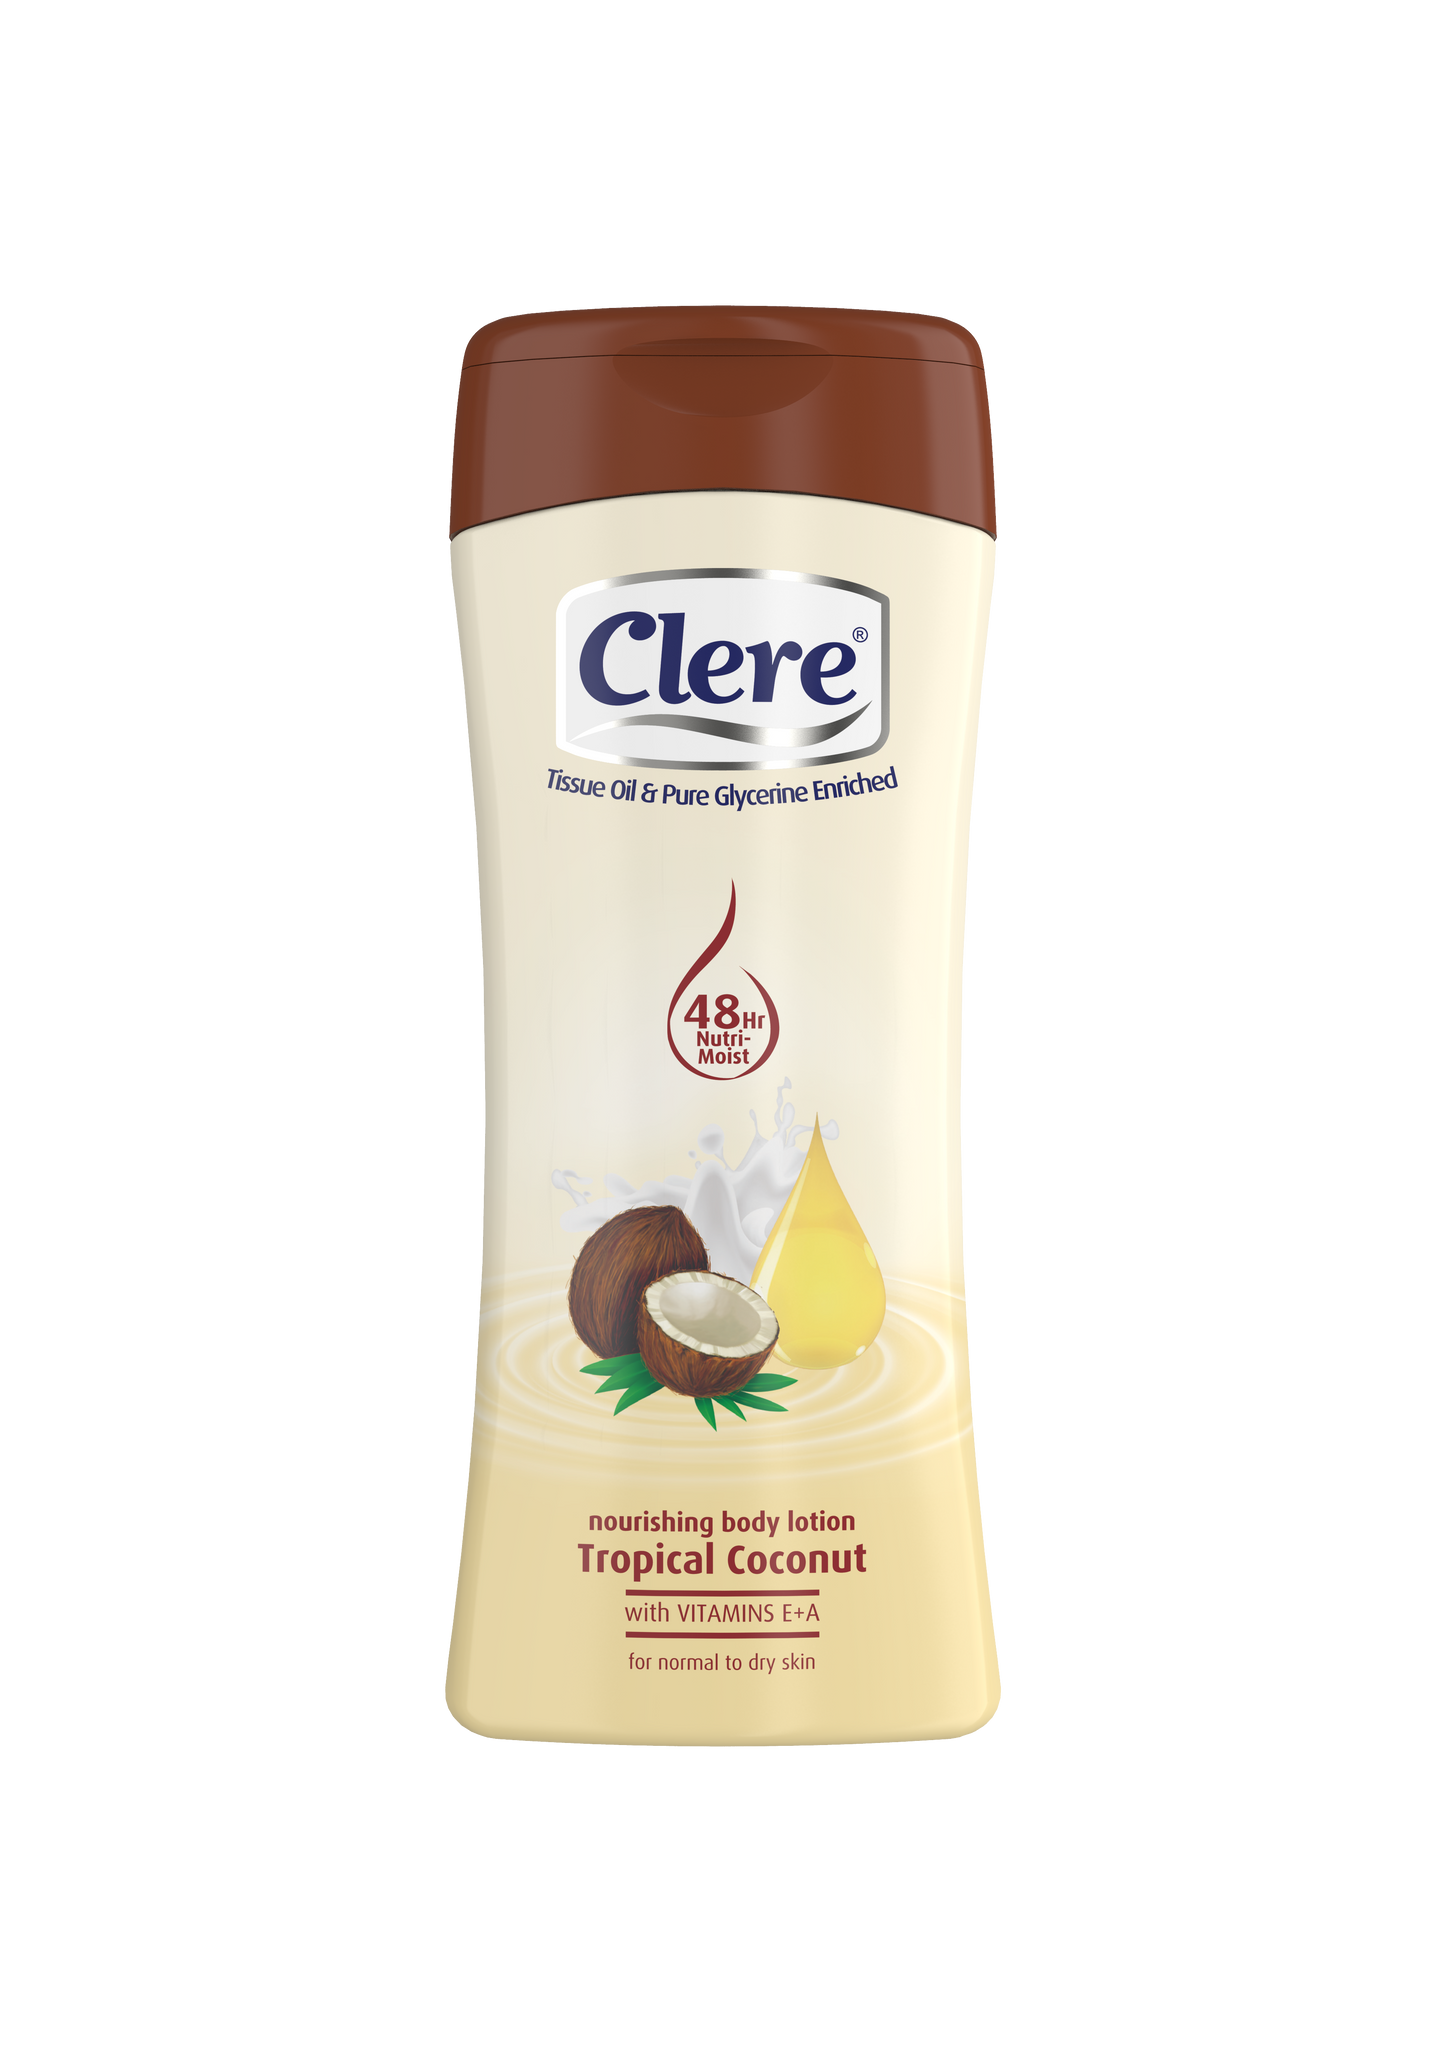 Clere Hand & Body Lotion - Tropical Fruit - 400ml 36-Pack